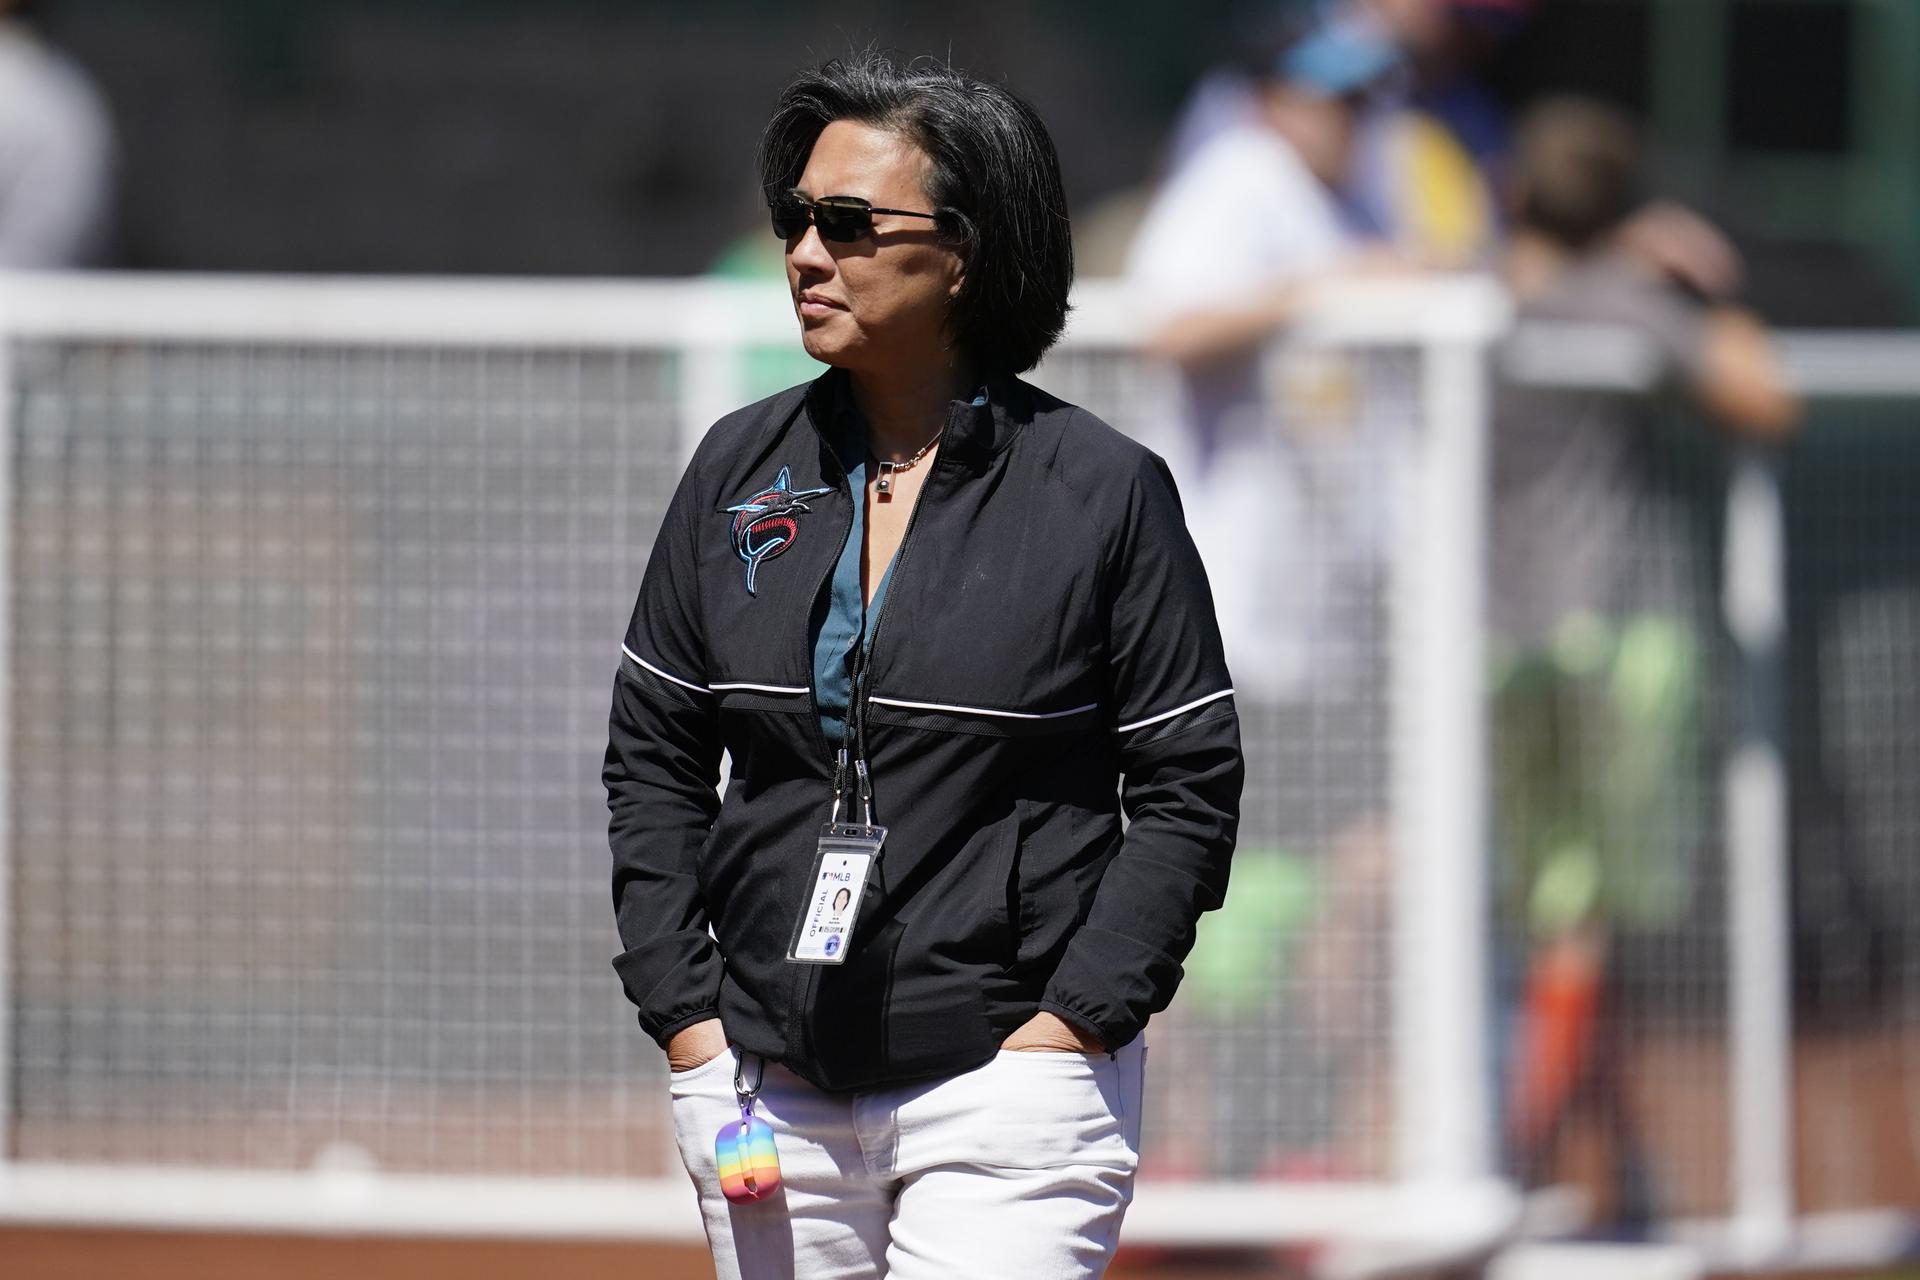 Marlins general manager Kim Ng stands on the field